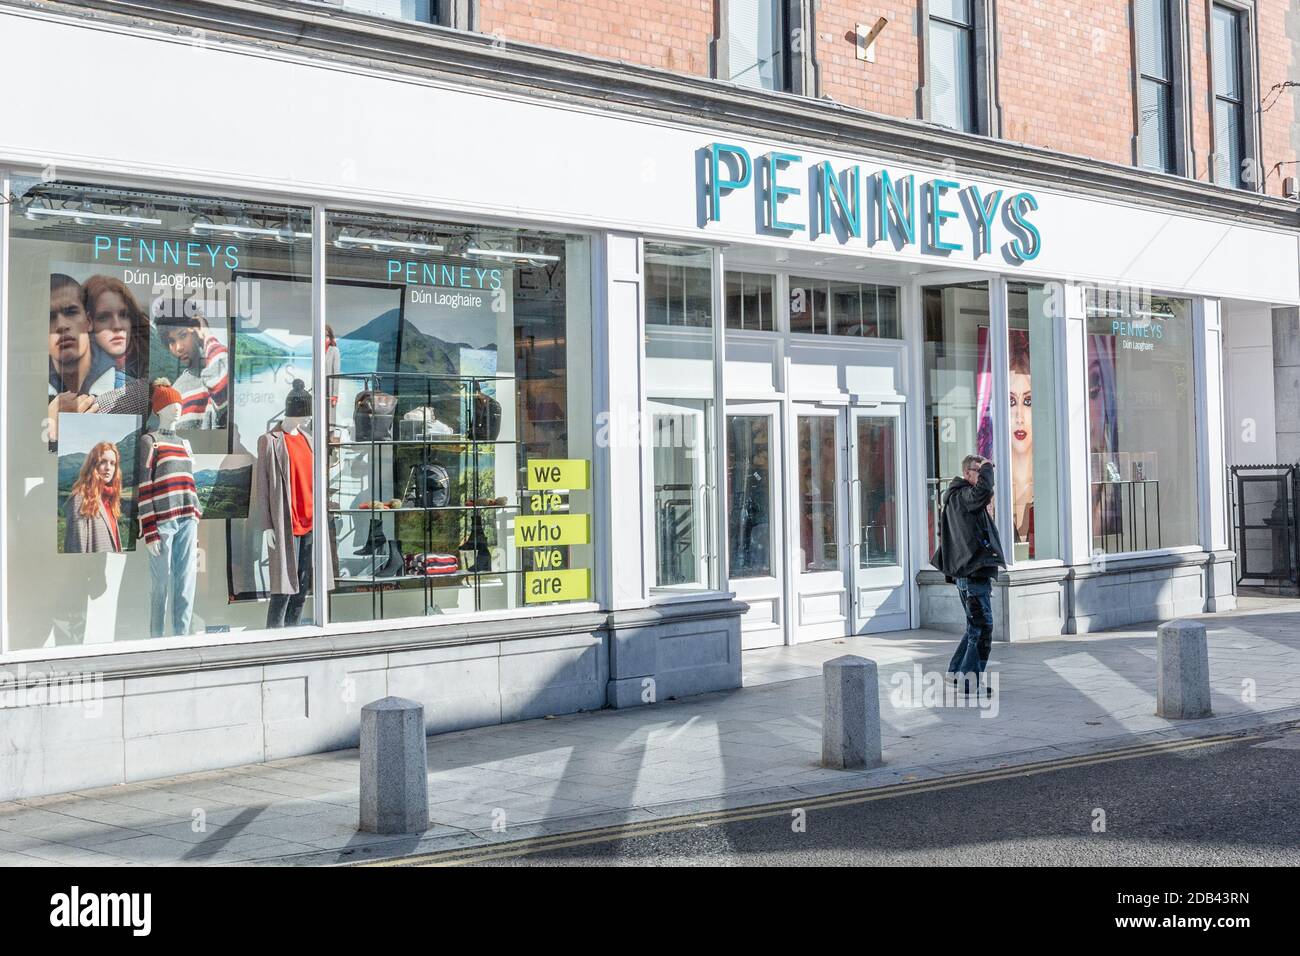 Penney's clothes shop in Dun Laoghaire main street in County Dublin, Ireland Stock Photo